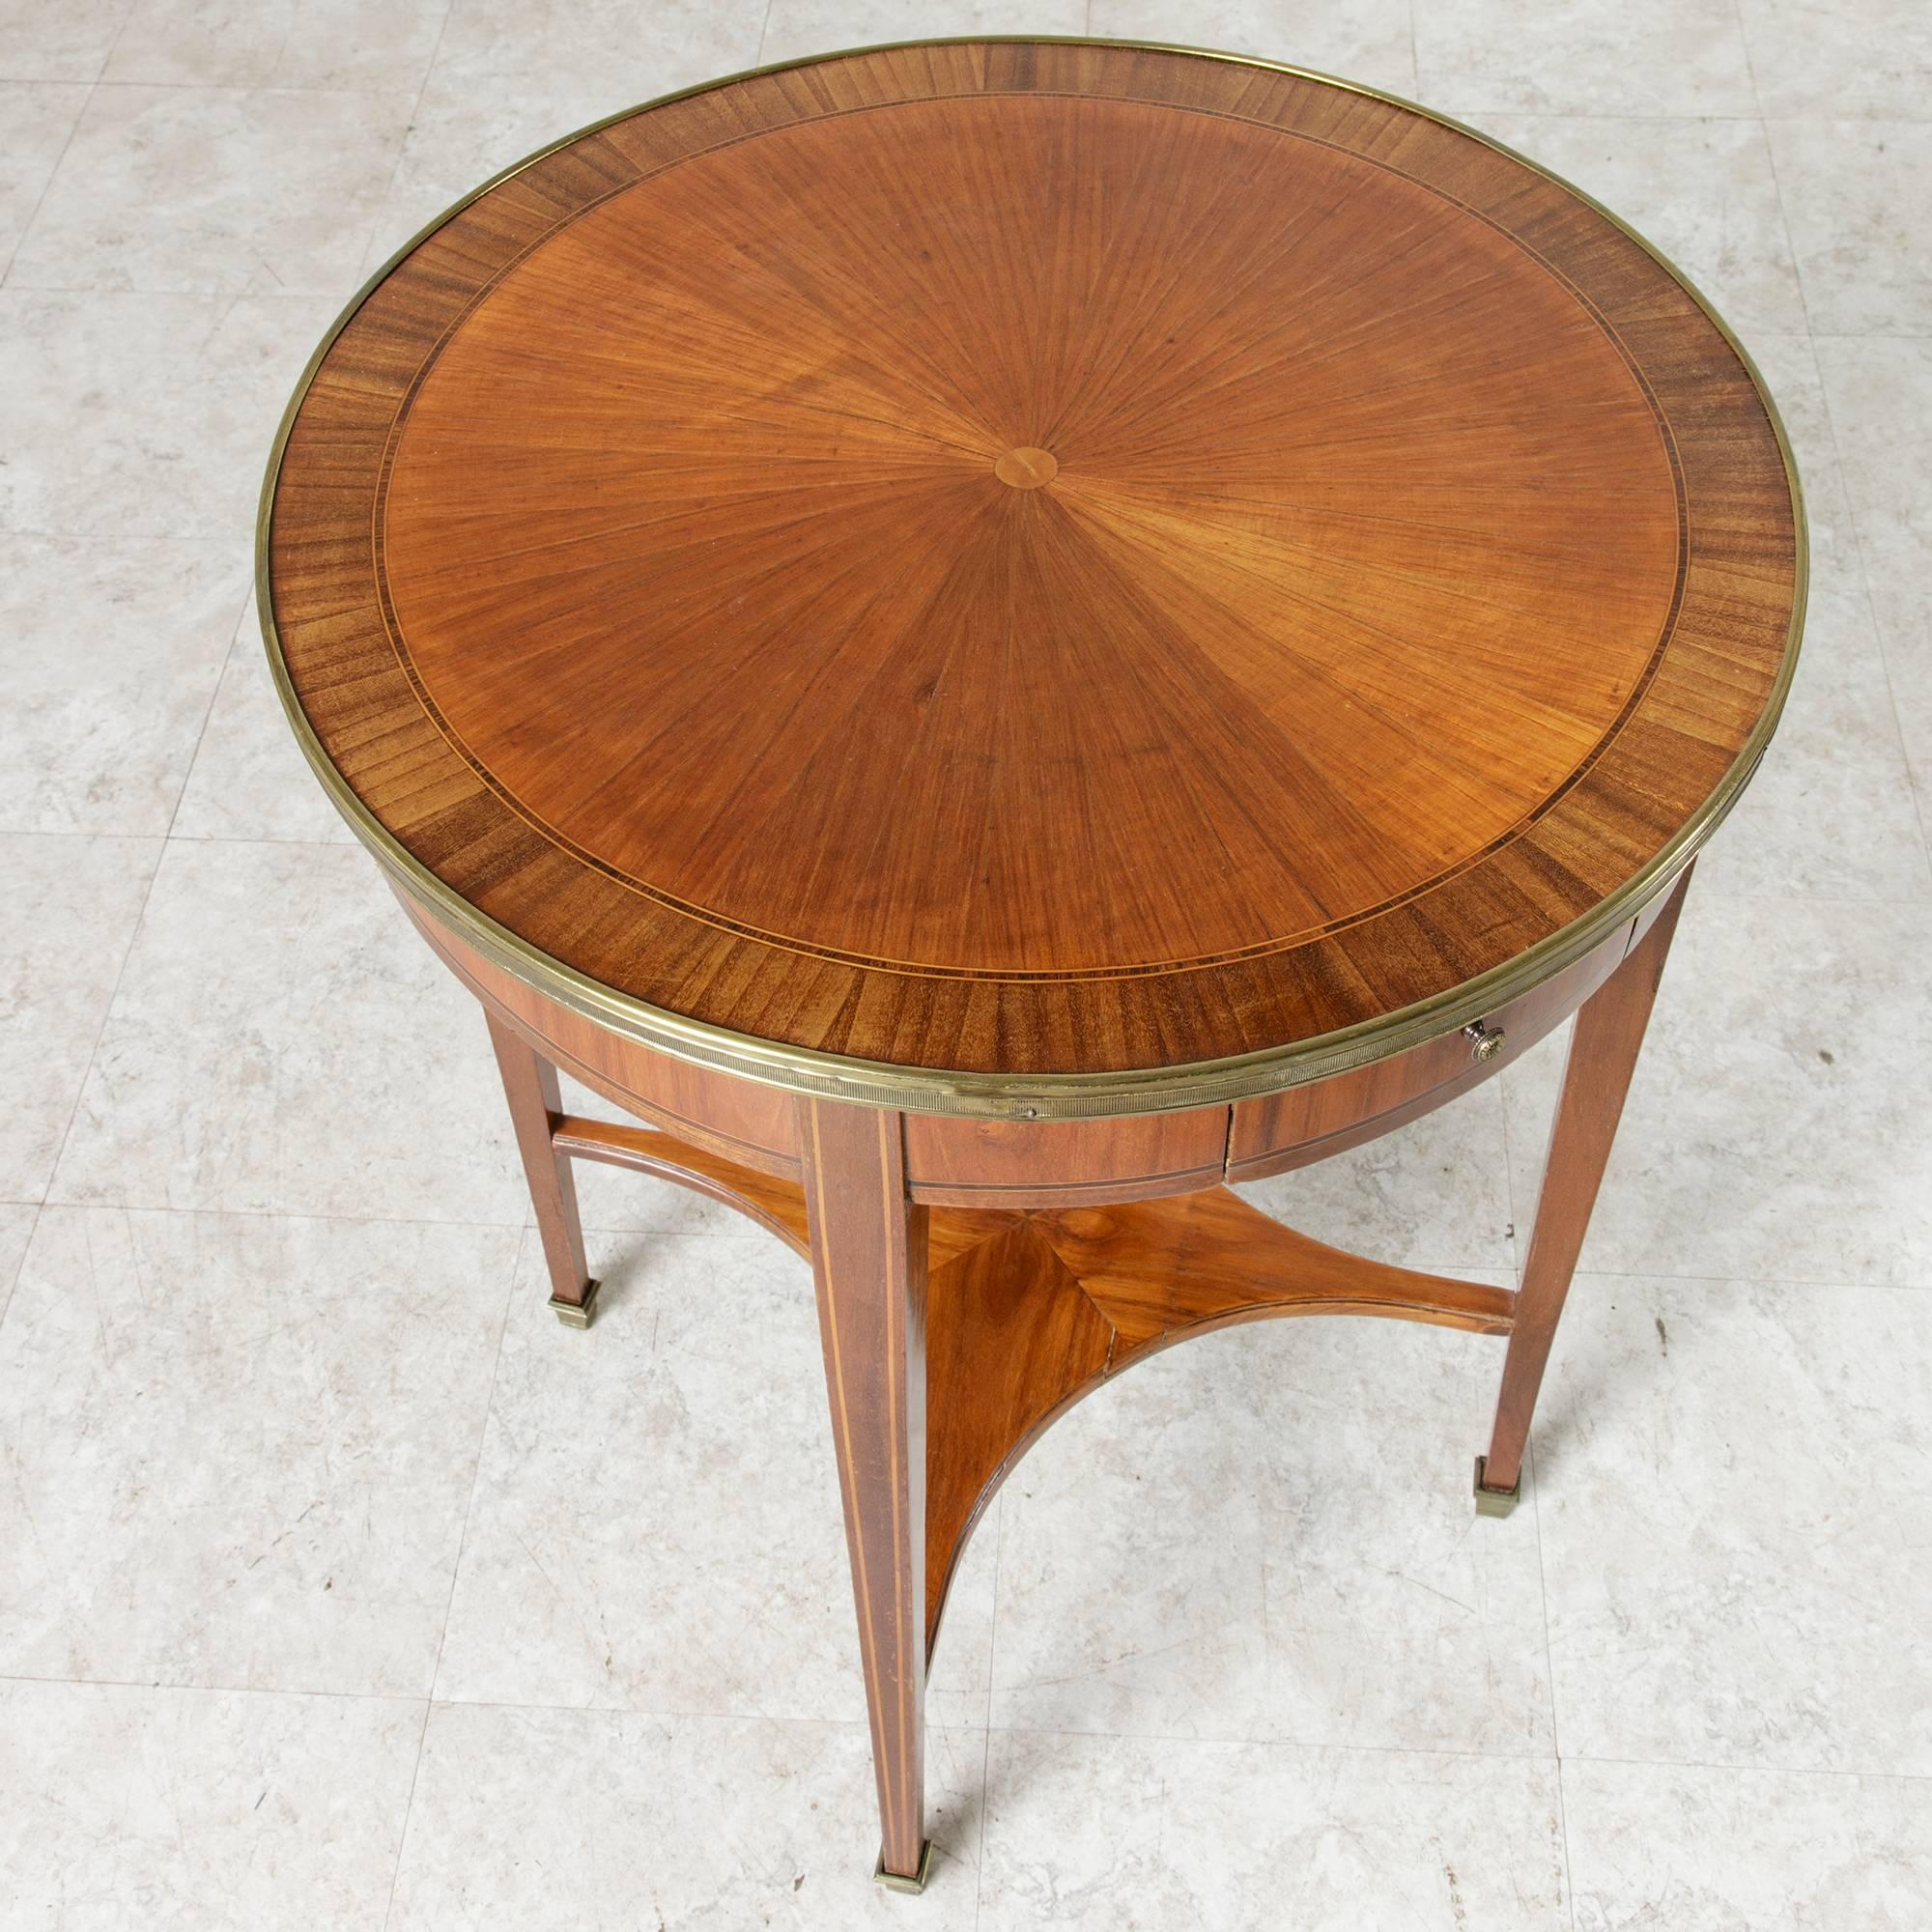 This Art Deco period gueridon or side table in the Louis XVI style features an inlaid rosewood and walnut marquetry top in a sunburst pattern. Bands of palisander and sycamore form fine lines on its tapered square legs and around its apron. A brass